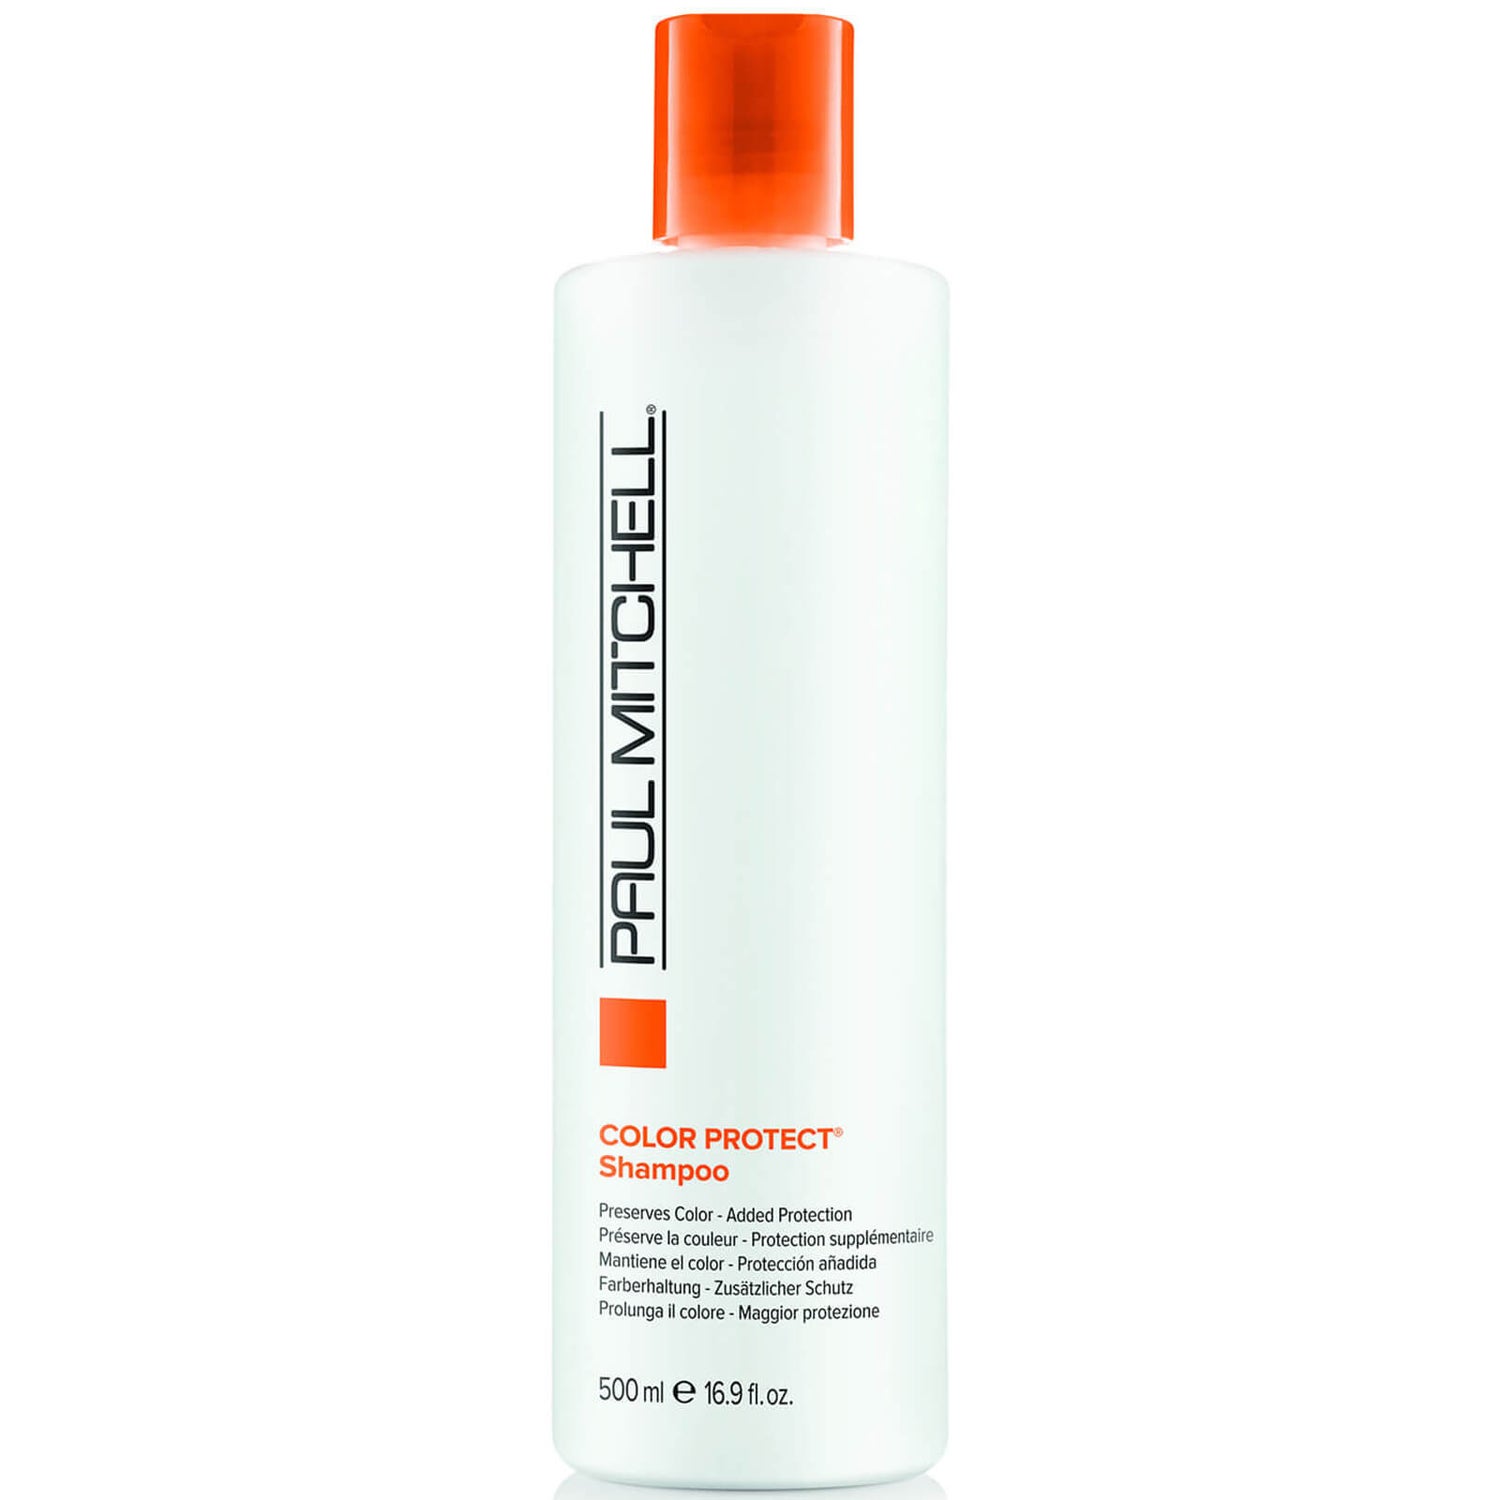 PAUL MITCHELL COLOR PROTECT DAILY SHAMPOO (500ml)